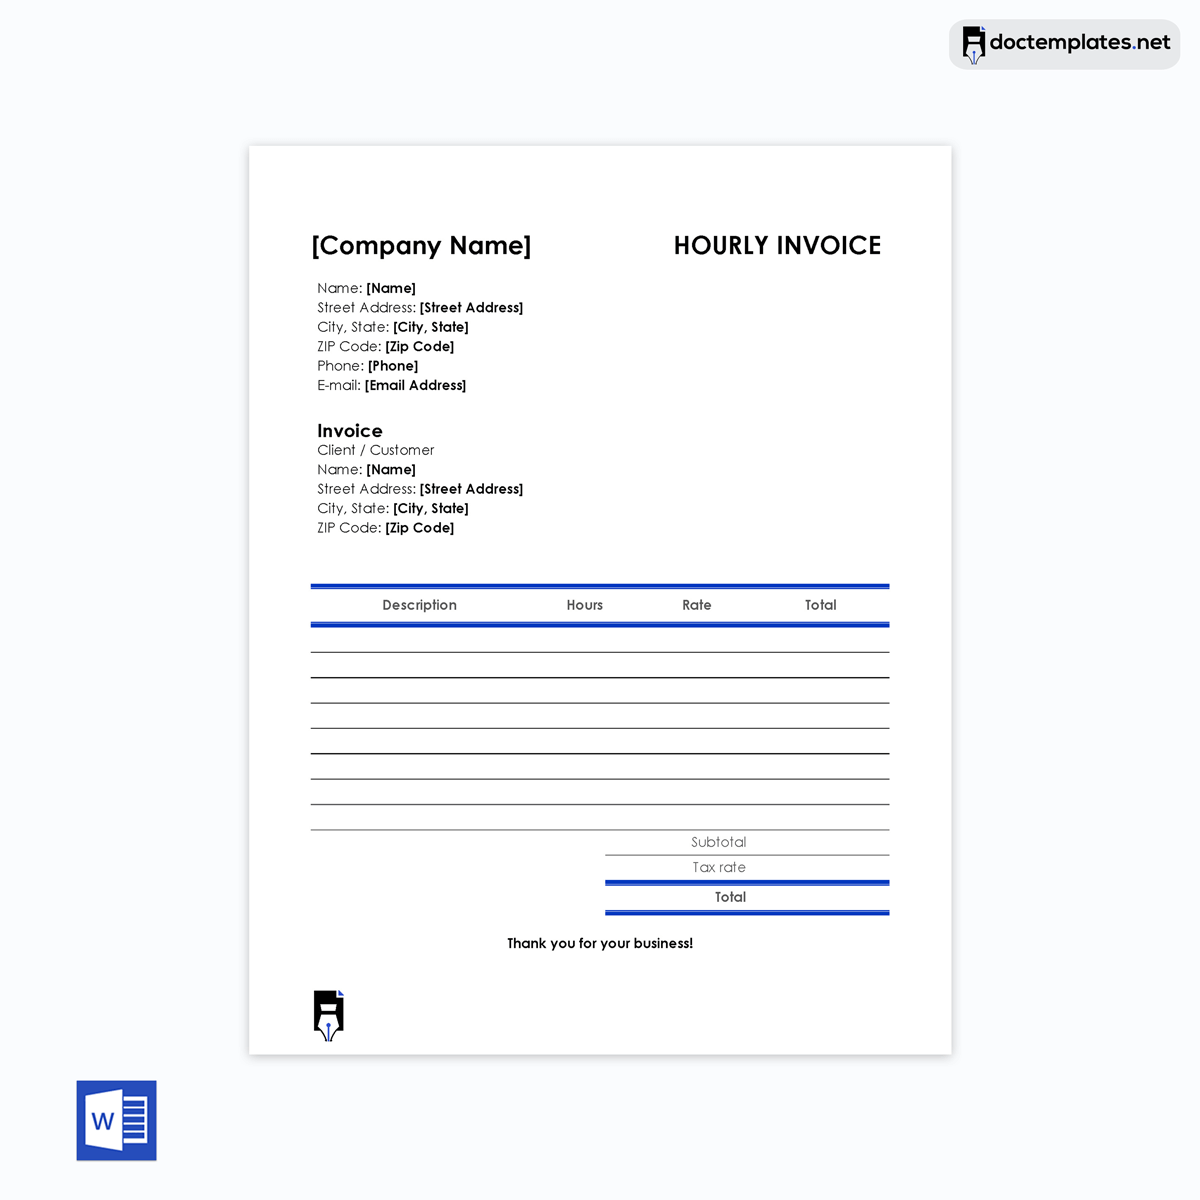  hourly invoice template word-09